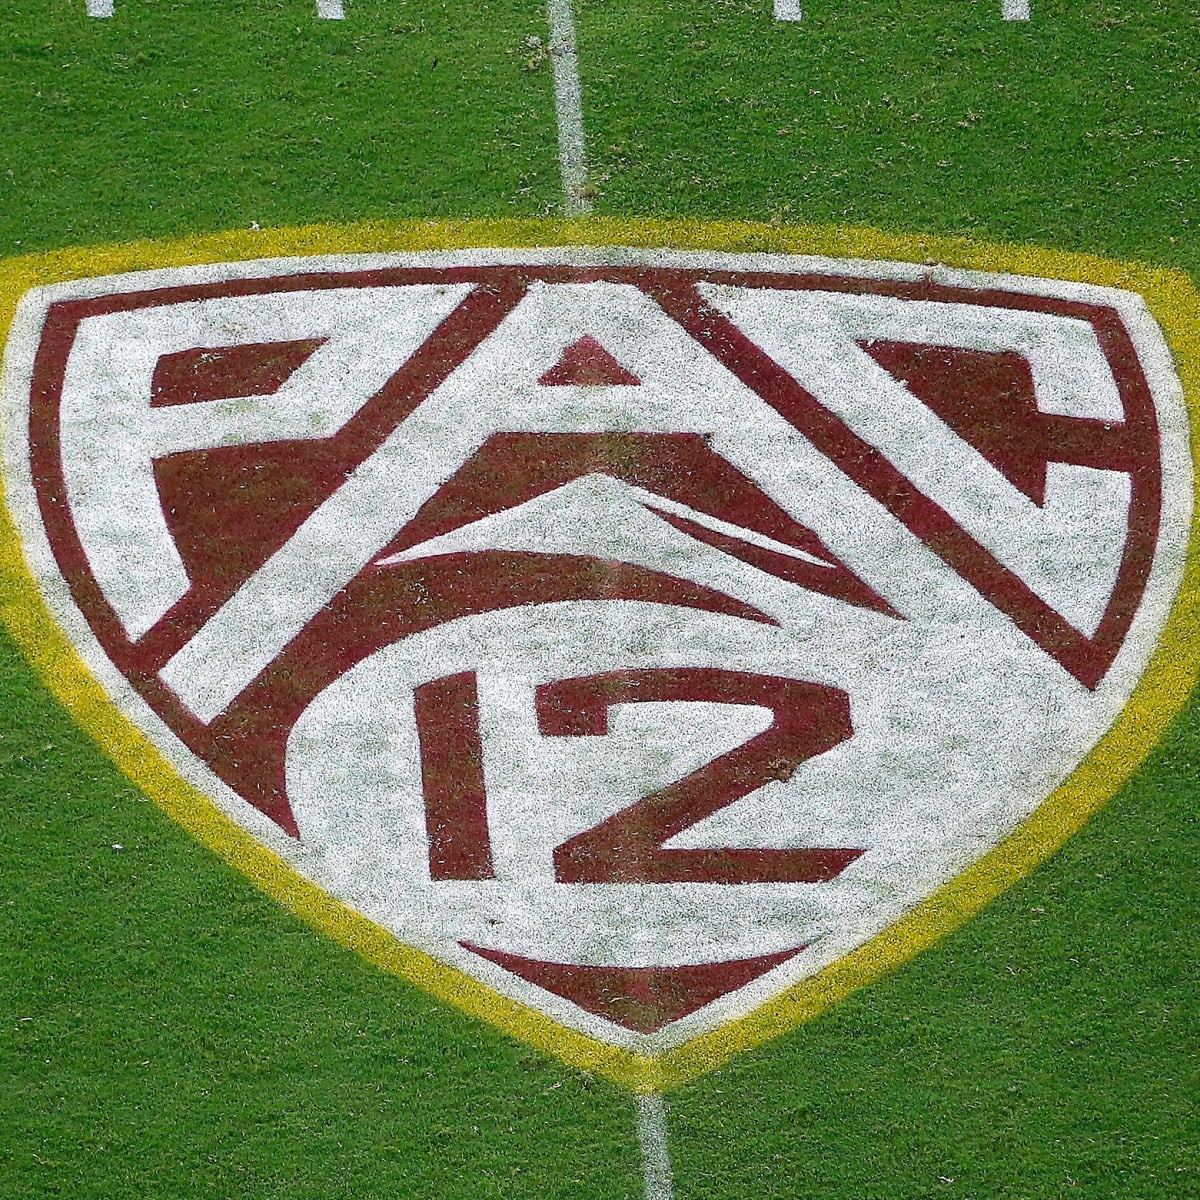 Pac-12 Commissioner Proposes Media Rights Deal With Apple, per Report